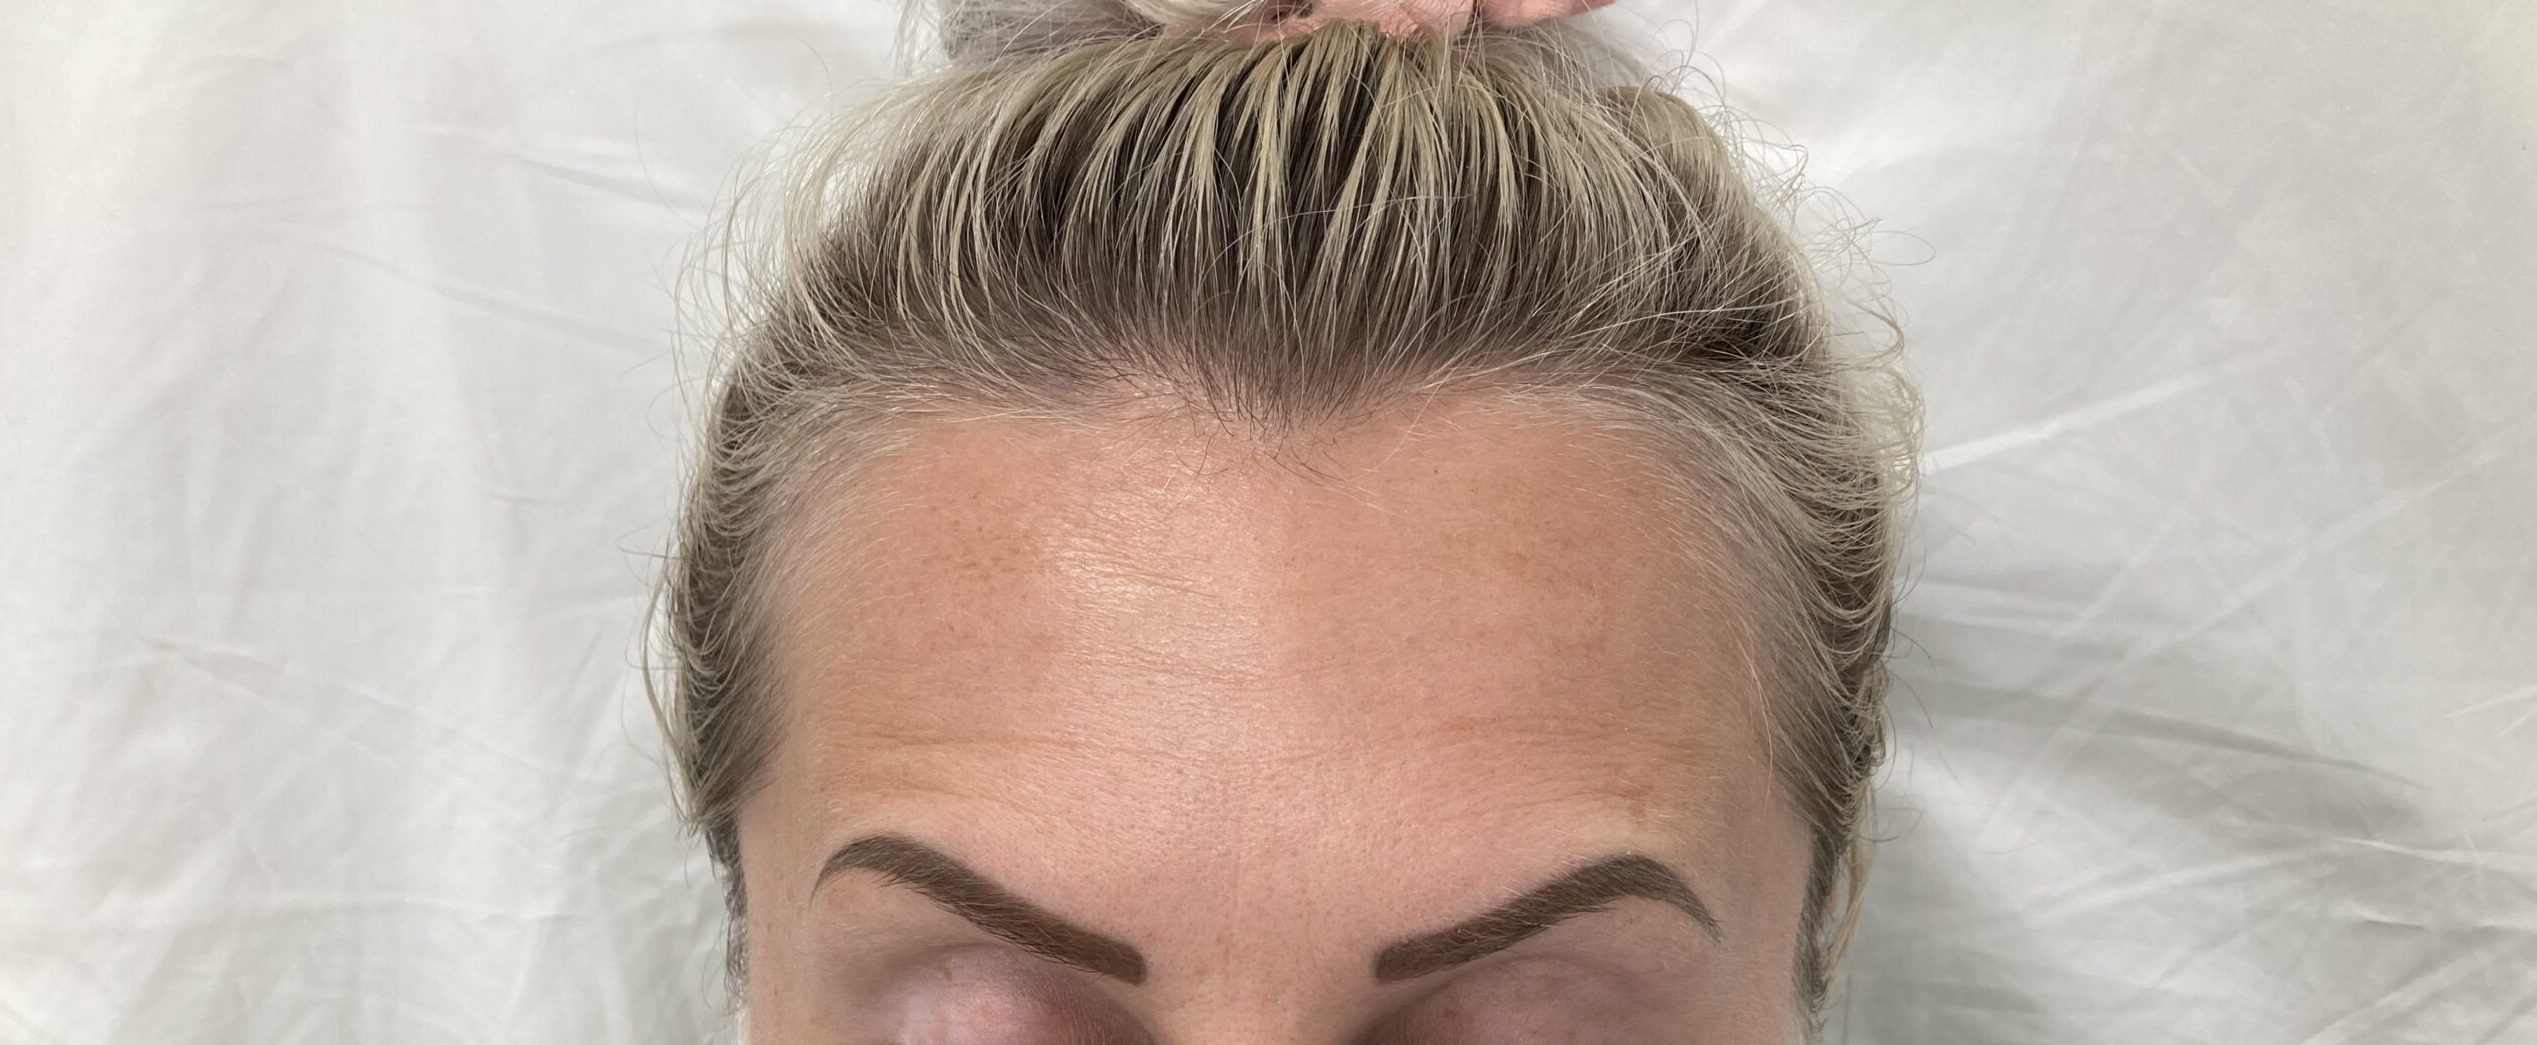 After-Anti-Wrinkle Injections